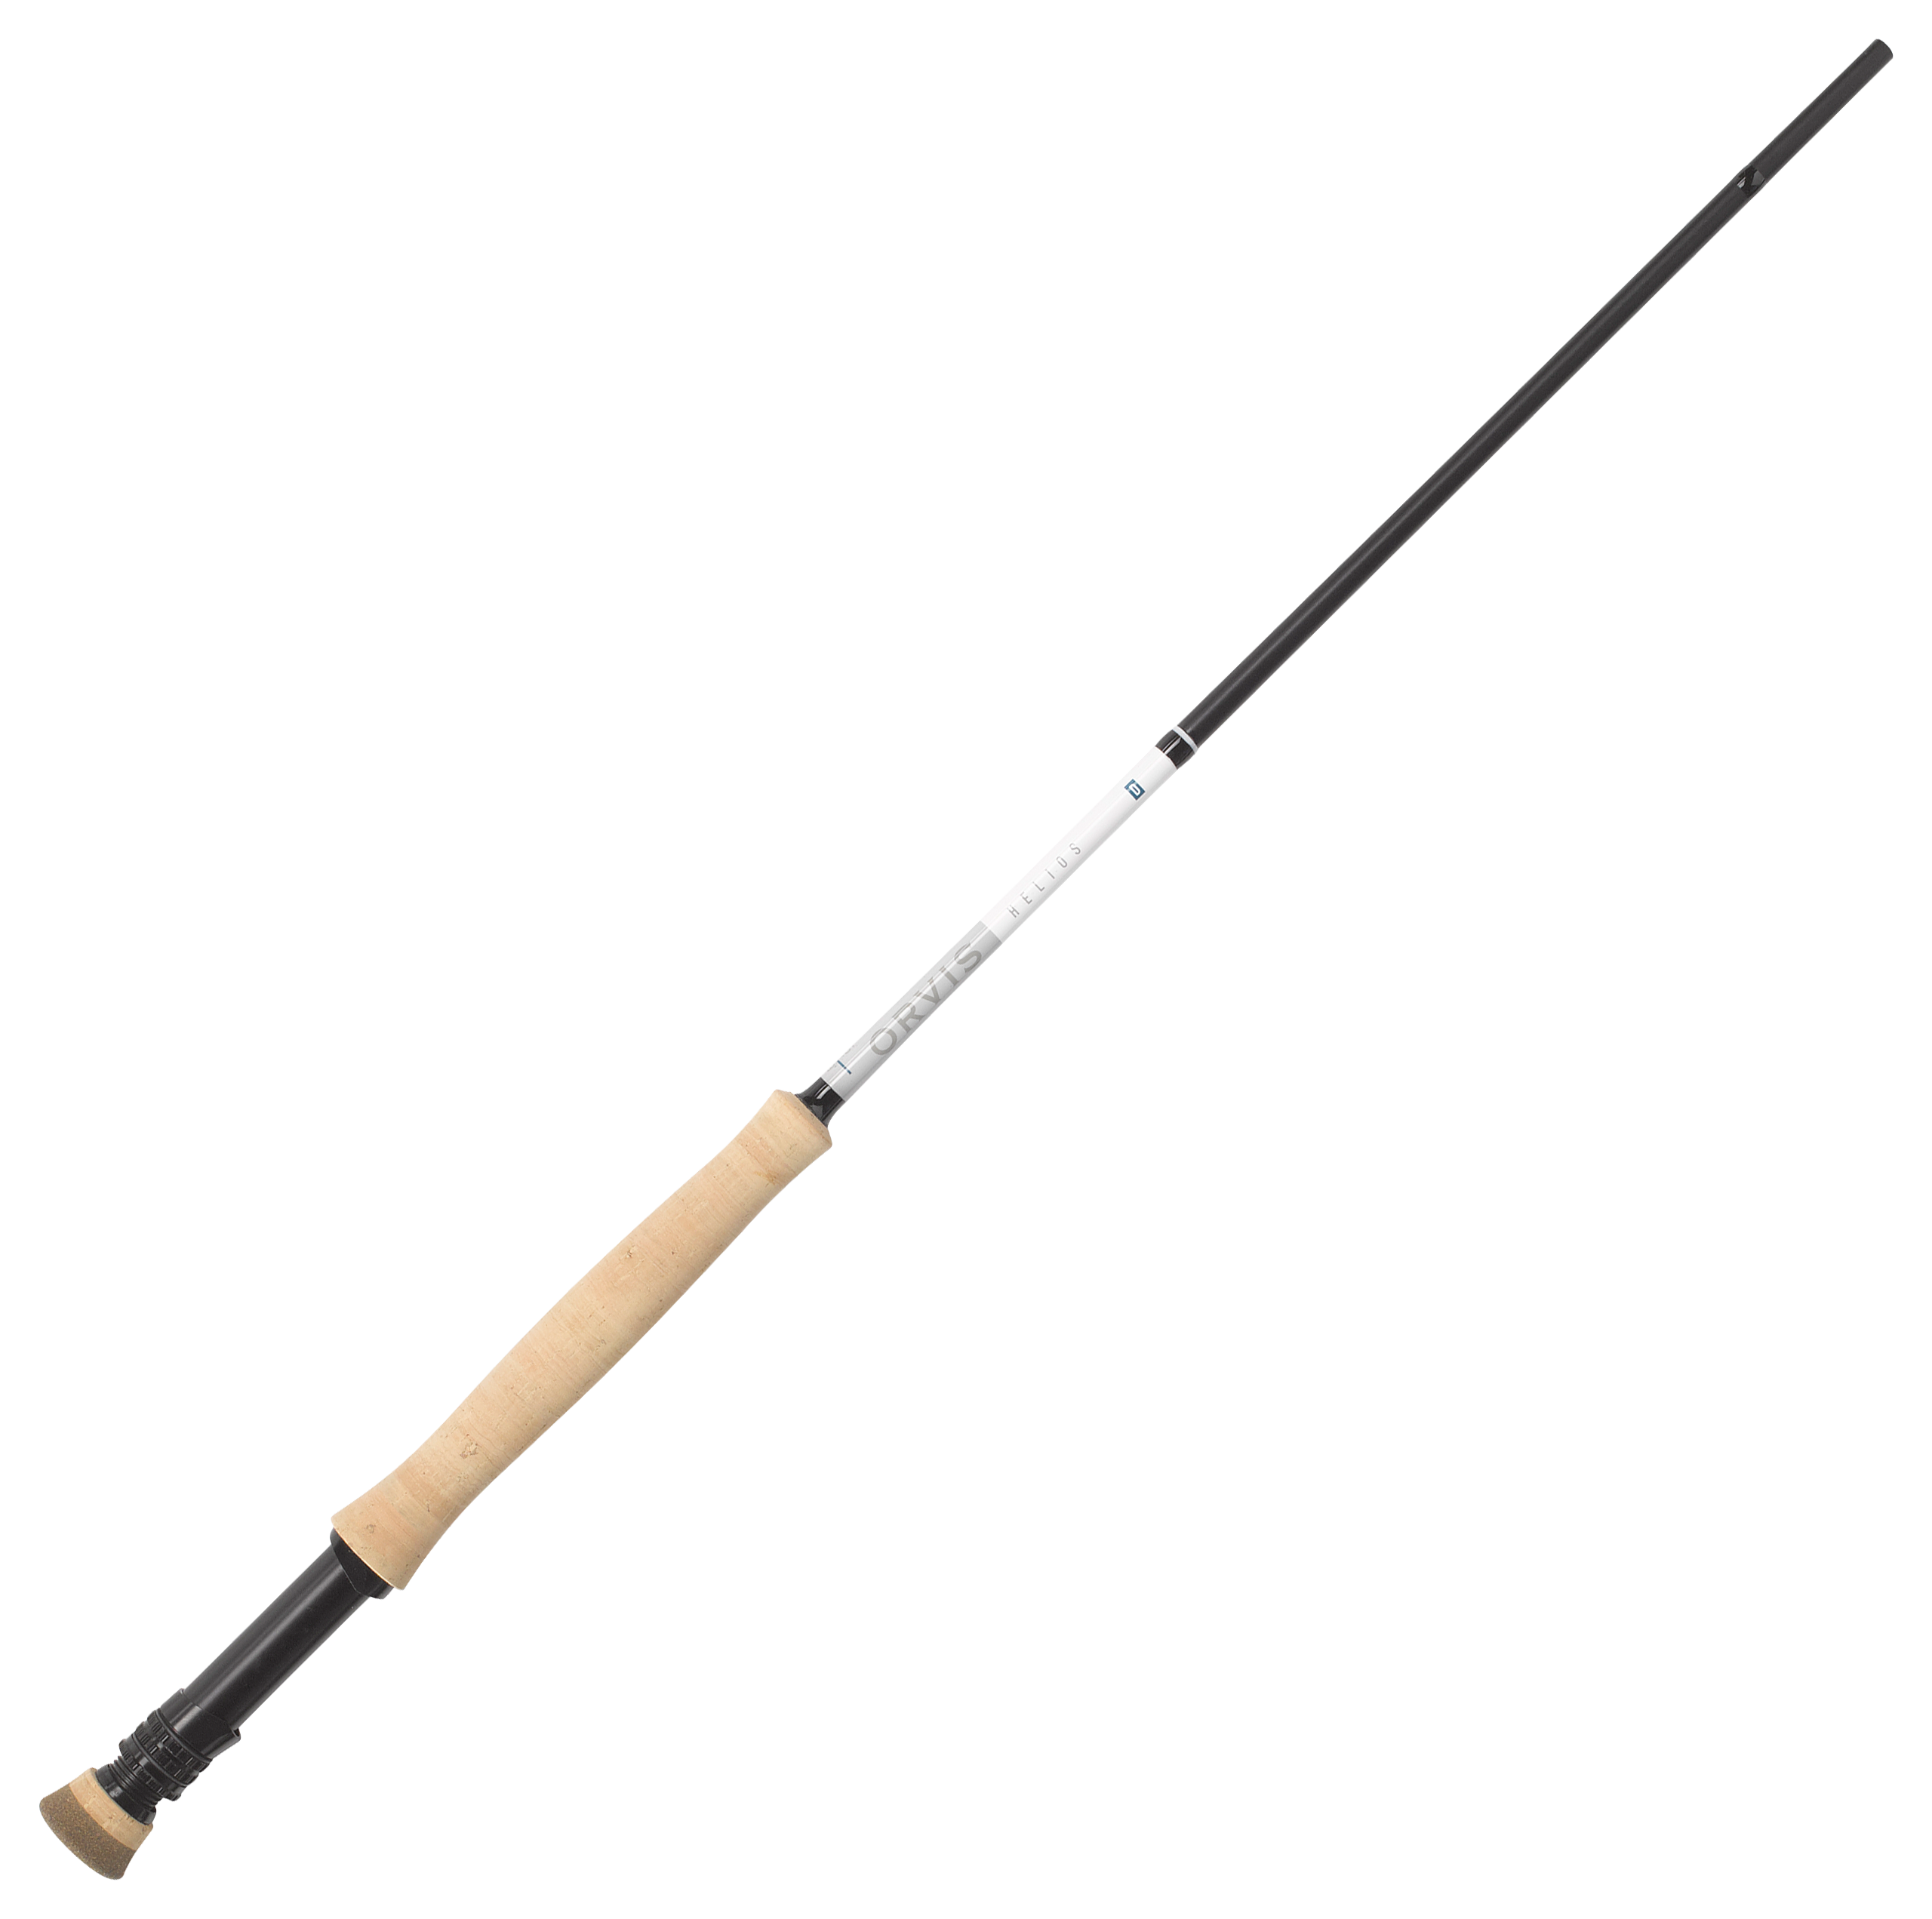 Orvis Helios D Fly Rod - Line Weight 5 - 10'